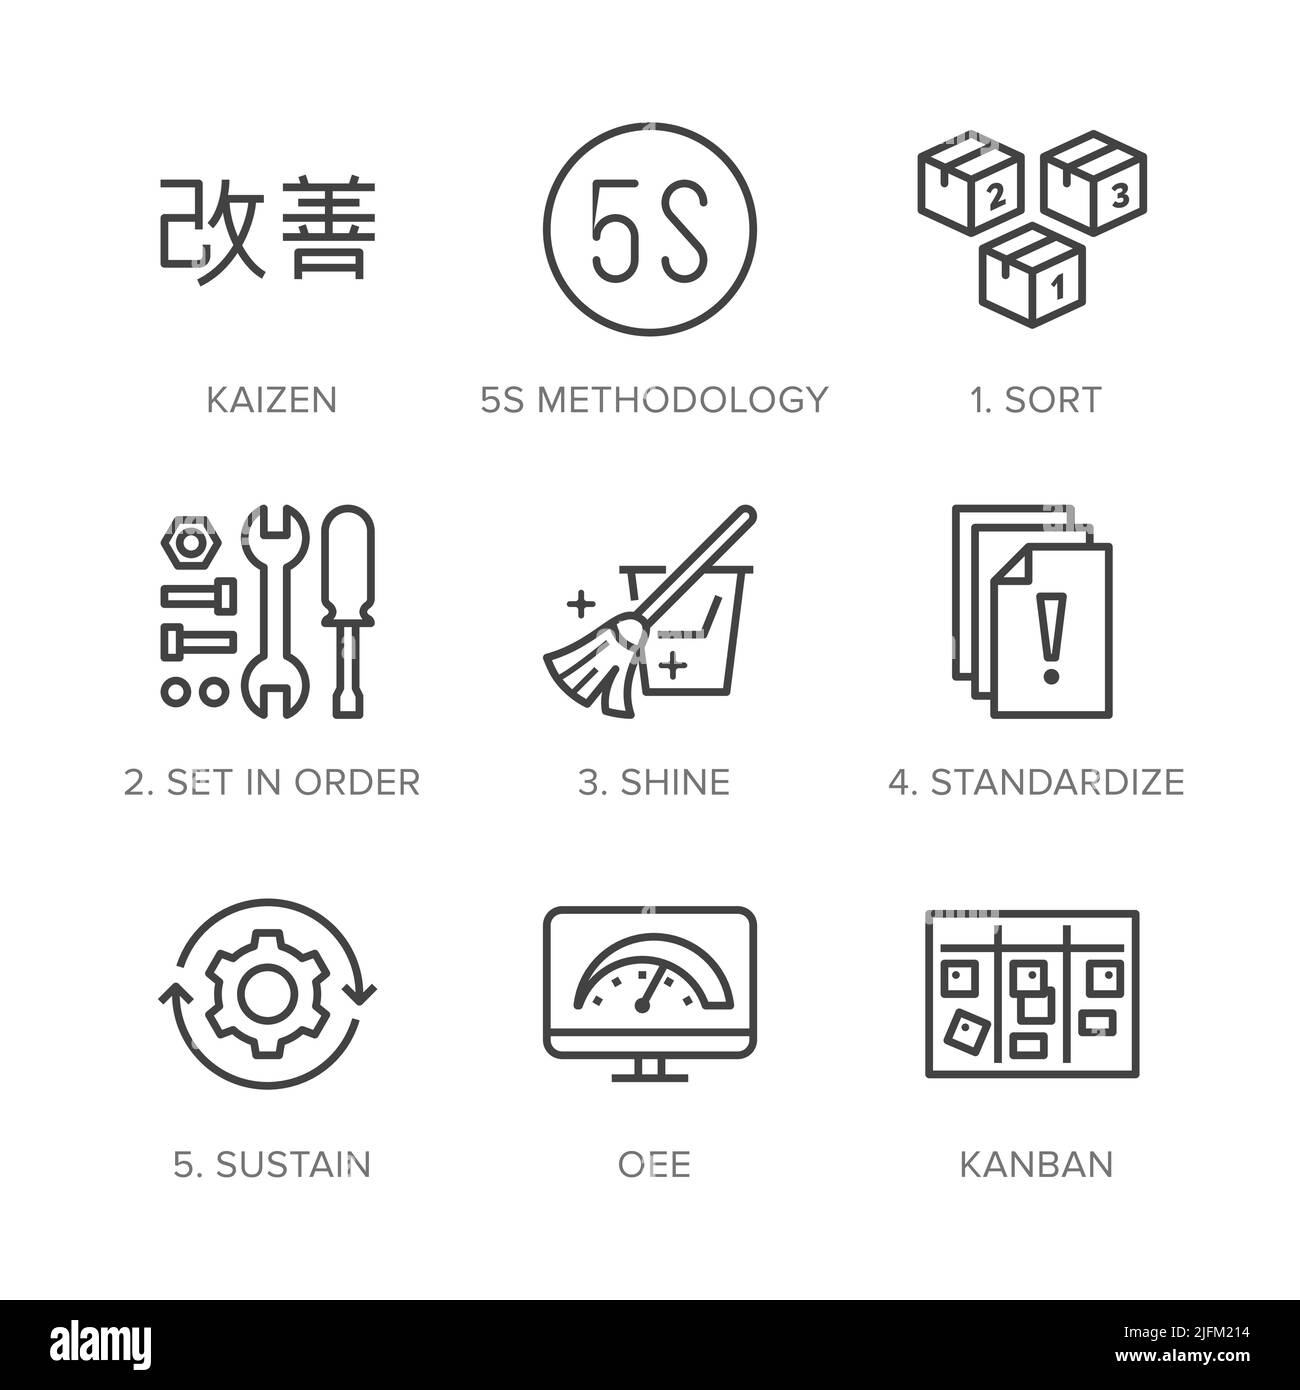 Kaizen, 5S methodology flat line icons set. Japanese business strategy, kanban method vector illustrations. Thin signs for management. Pixel perfect Stock Vector